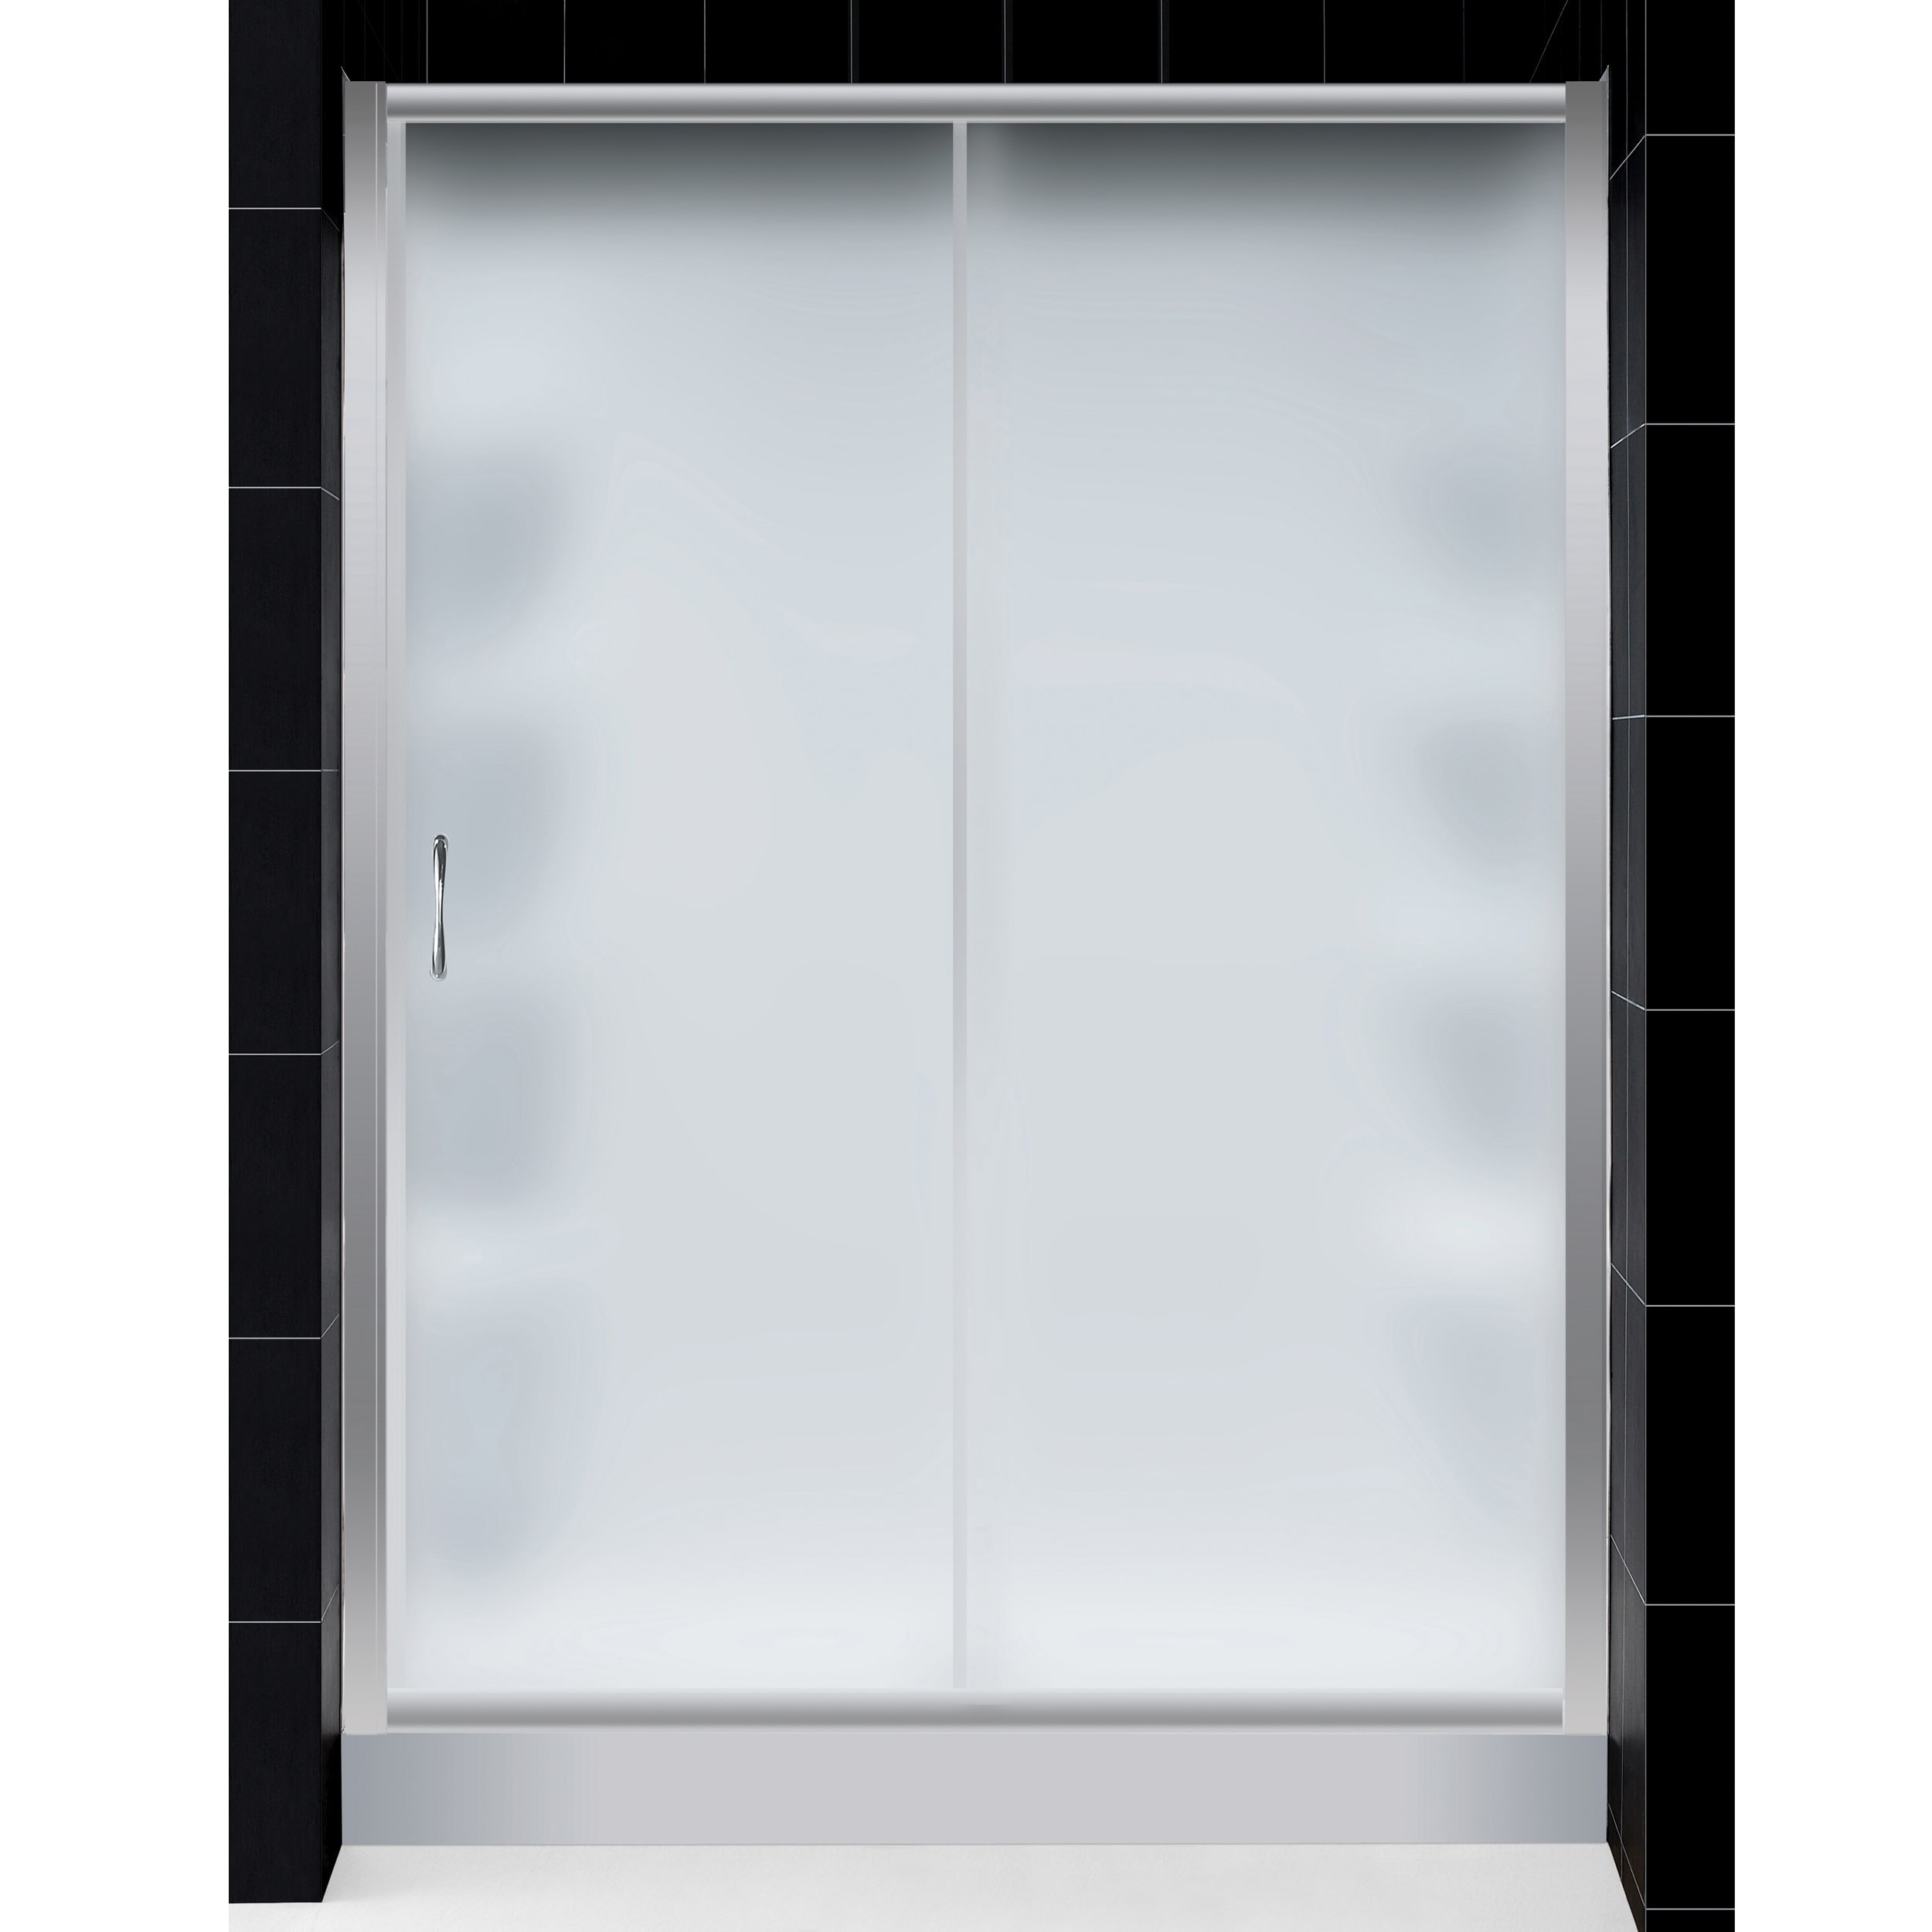   Infinity 30x60 Frosted Glass Shower Door with BackWall and Tray Combo